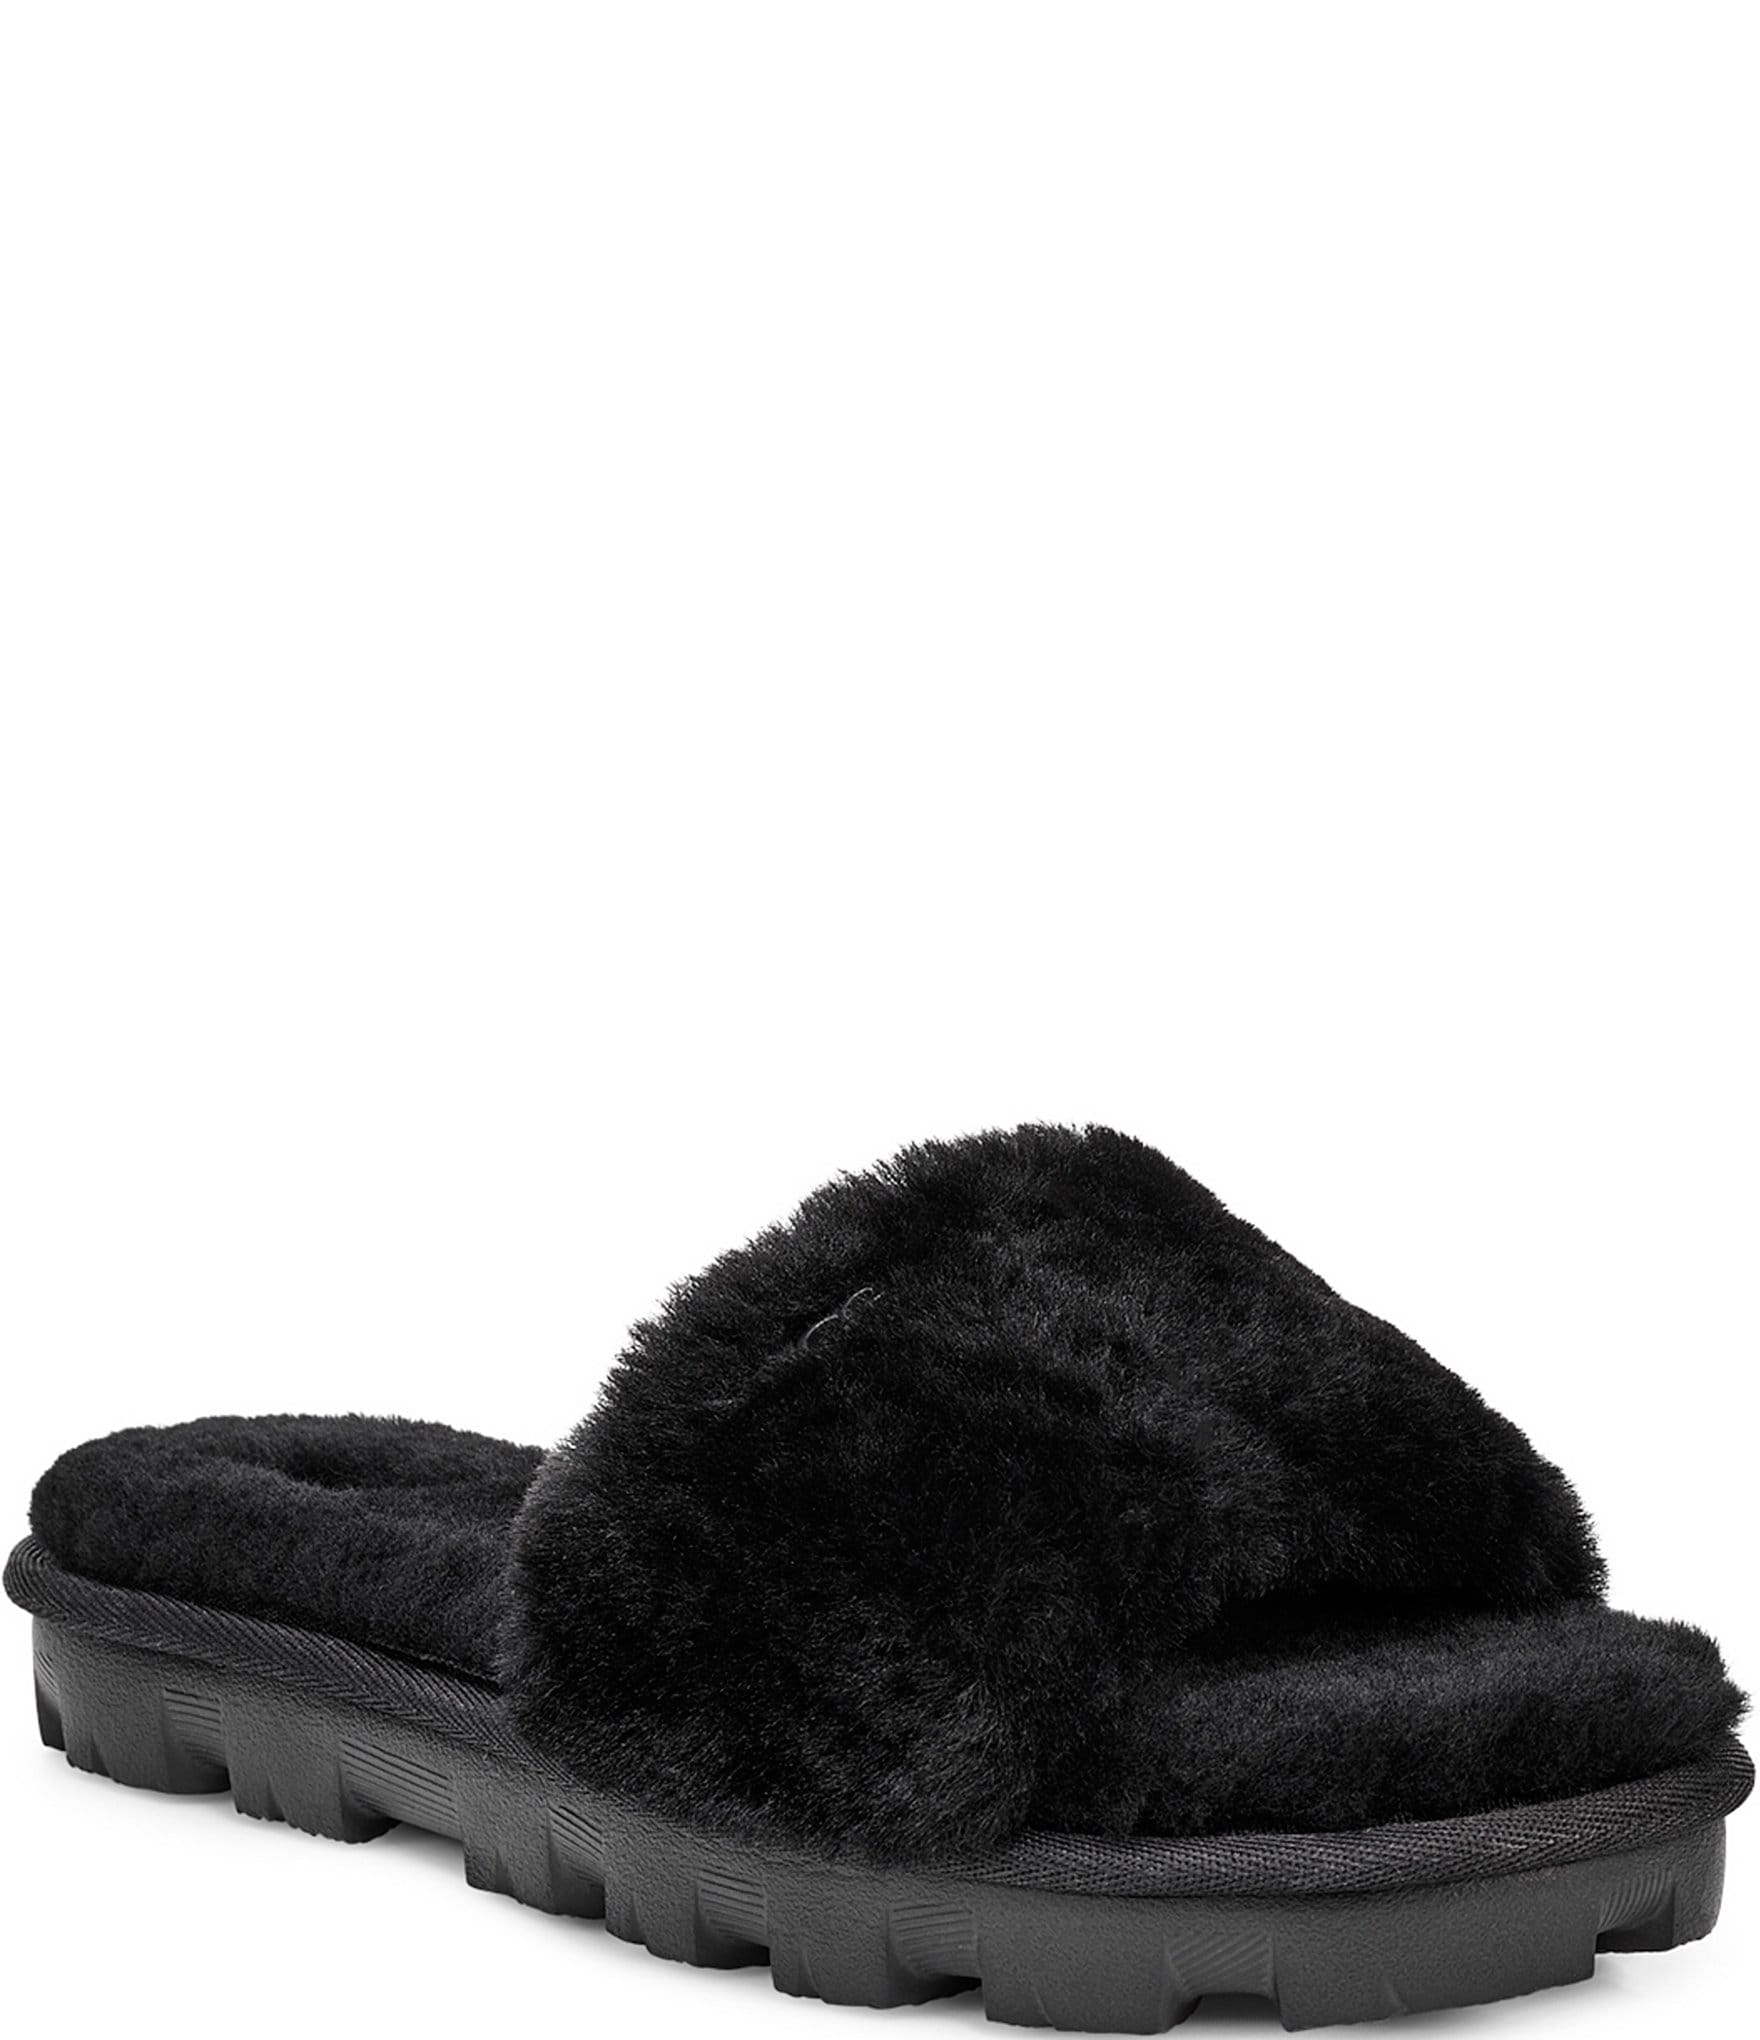 ugg slippers cozette